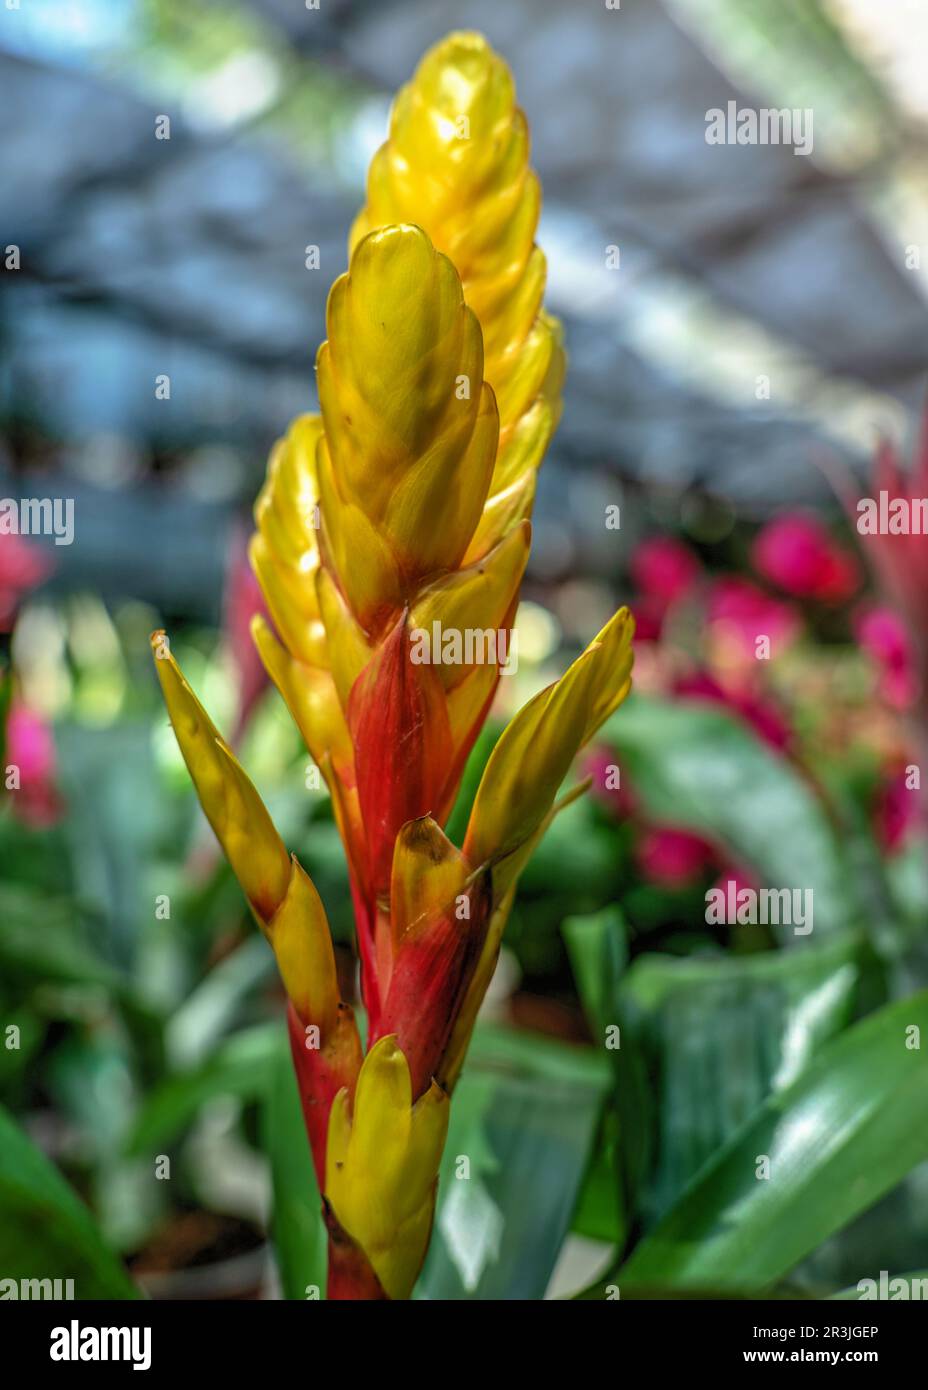 yellow frisee bromeliad against the background of green leaves on a sunny spring day Stock Photo